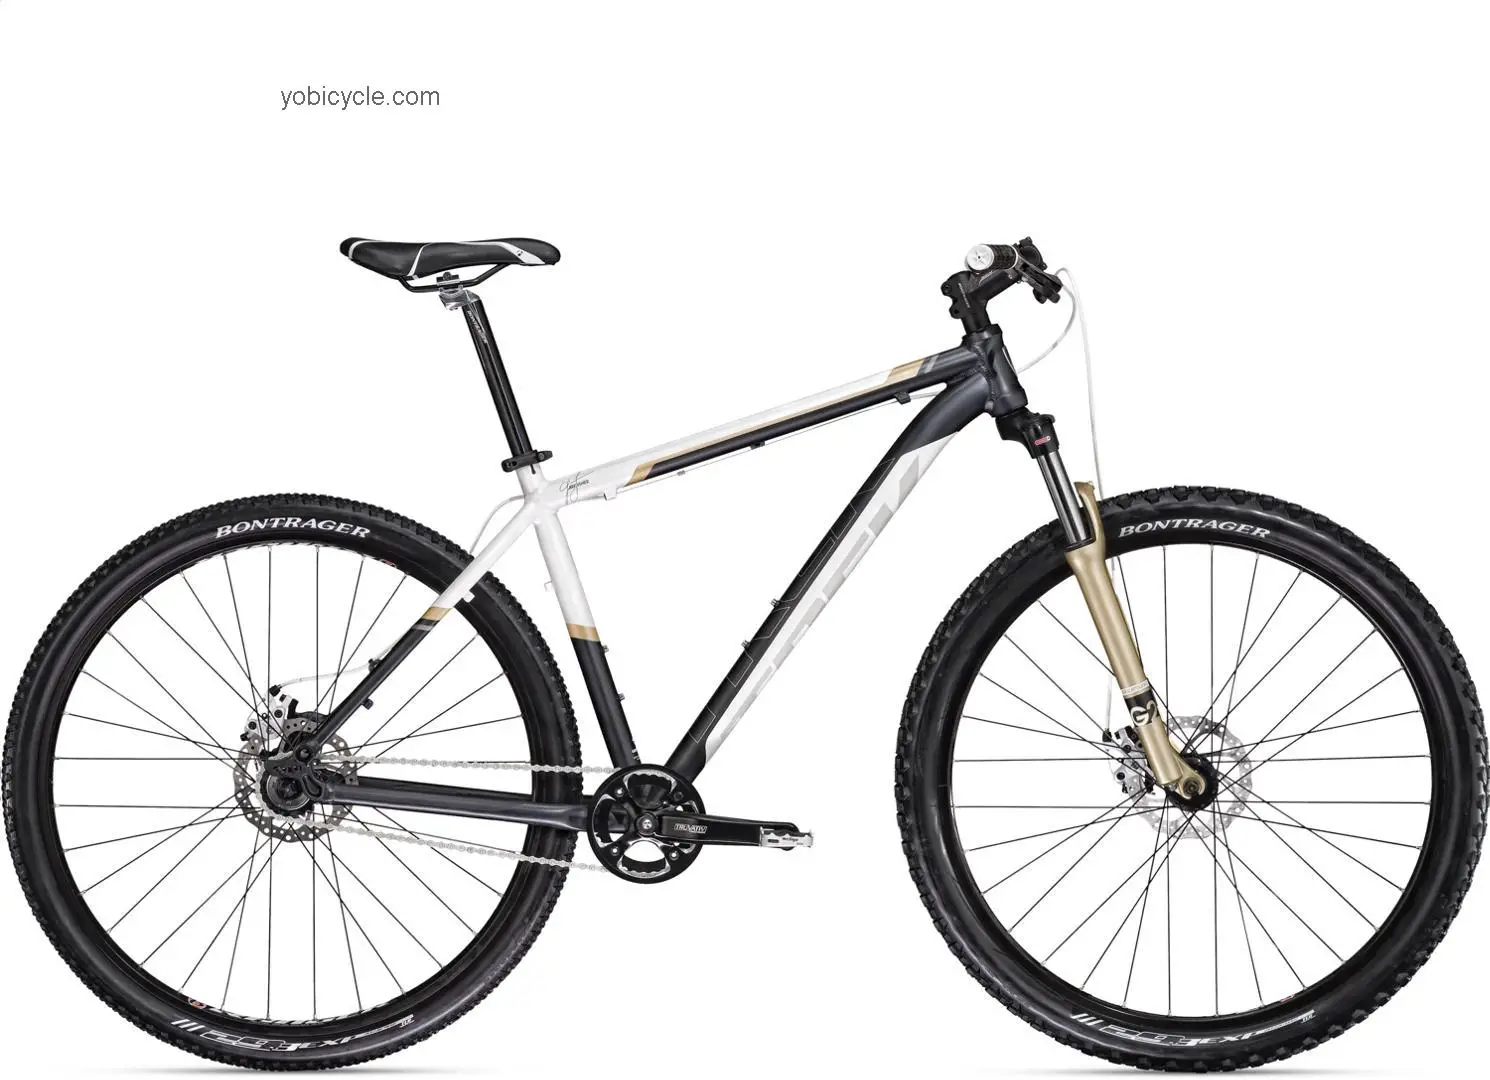 Trek Gary Fisher Marlin Single Speed 2011 comparison online with competitors